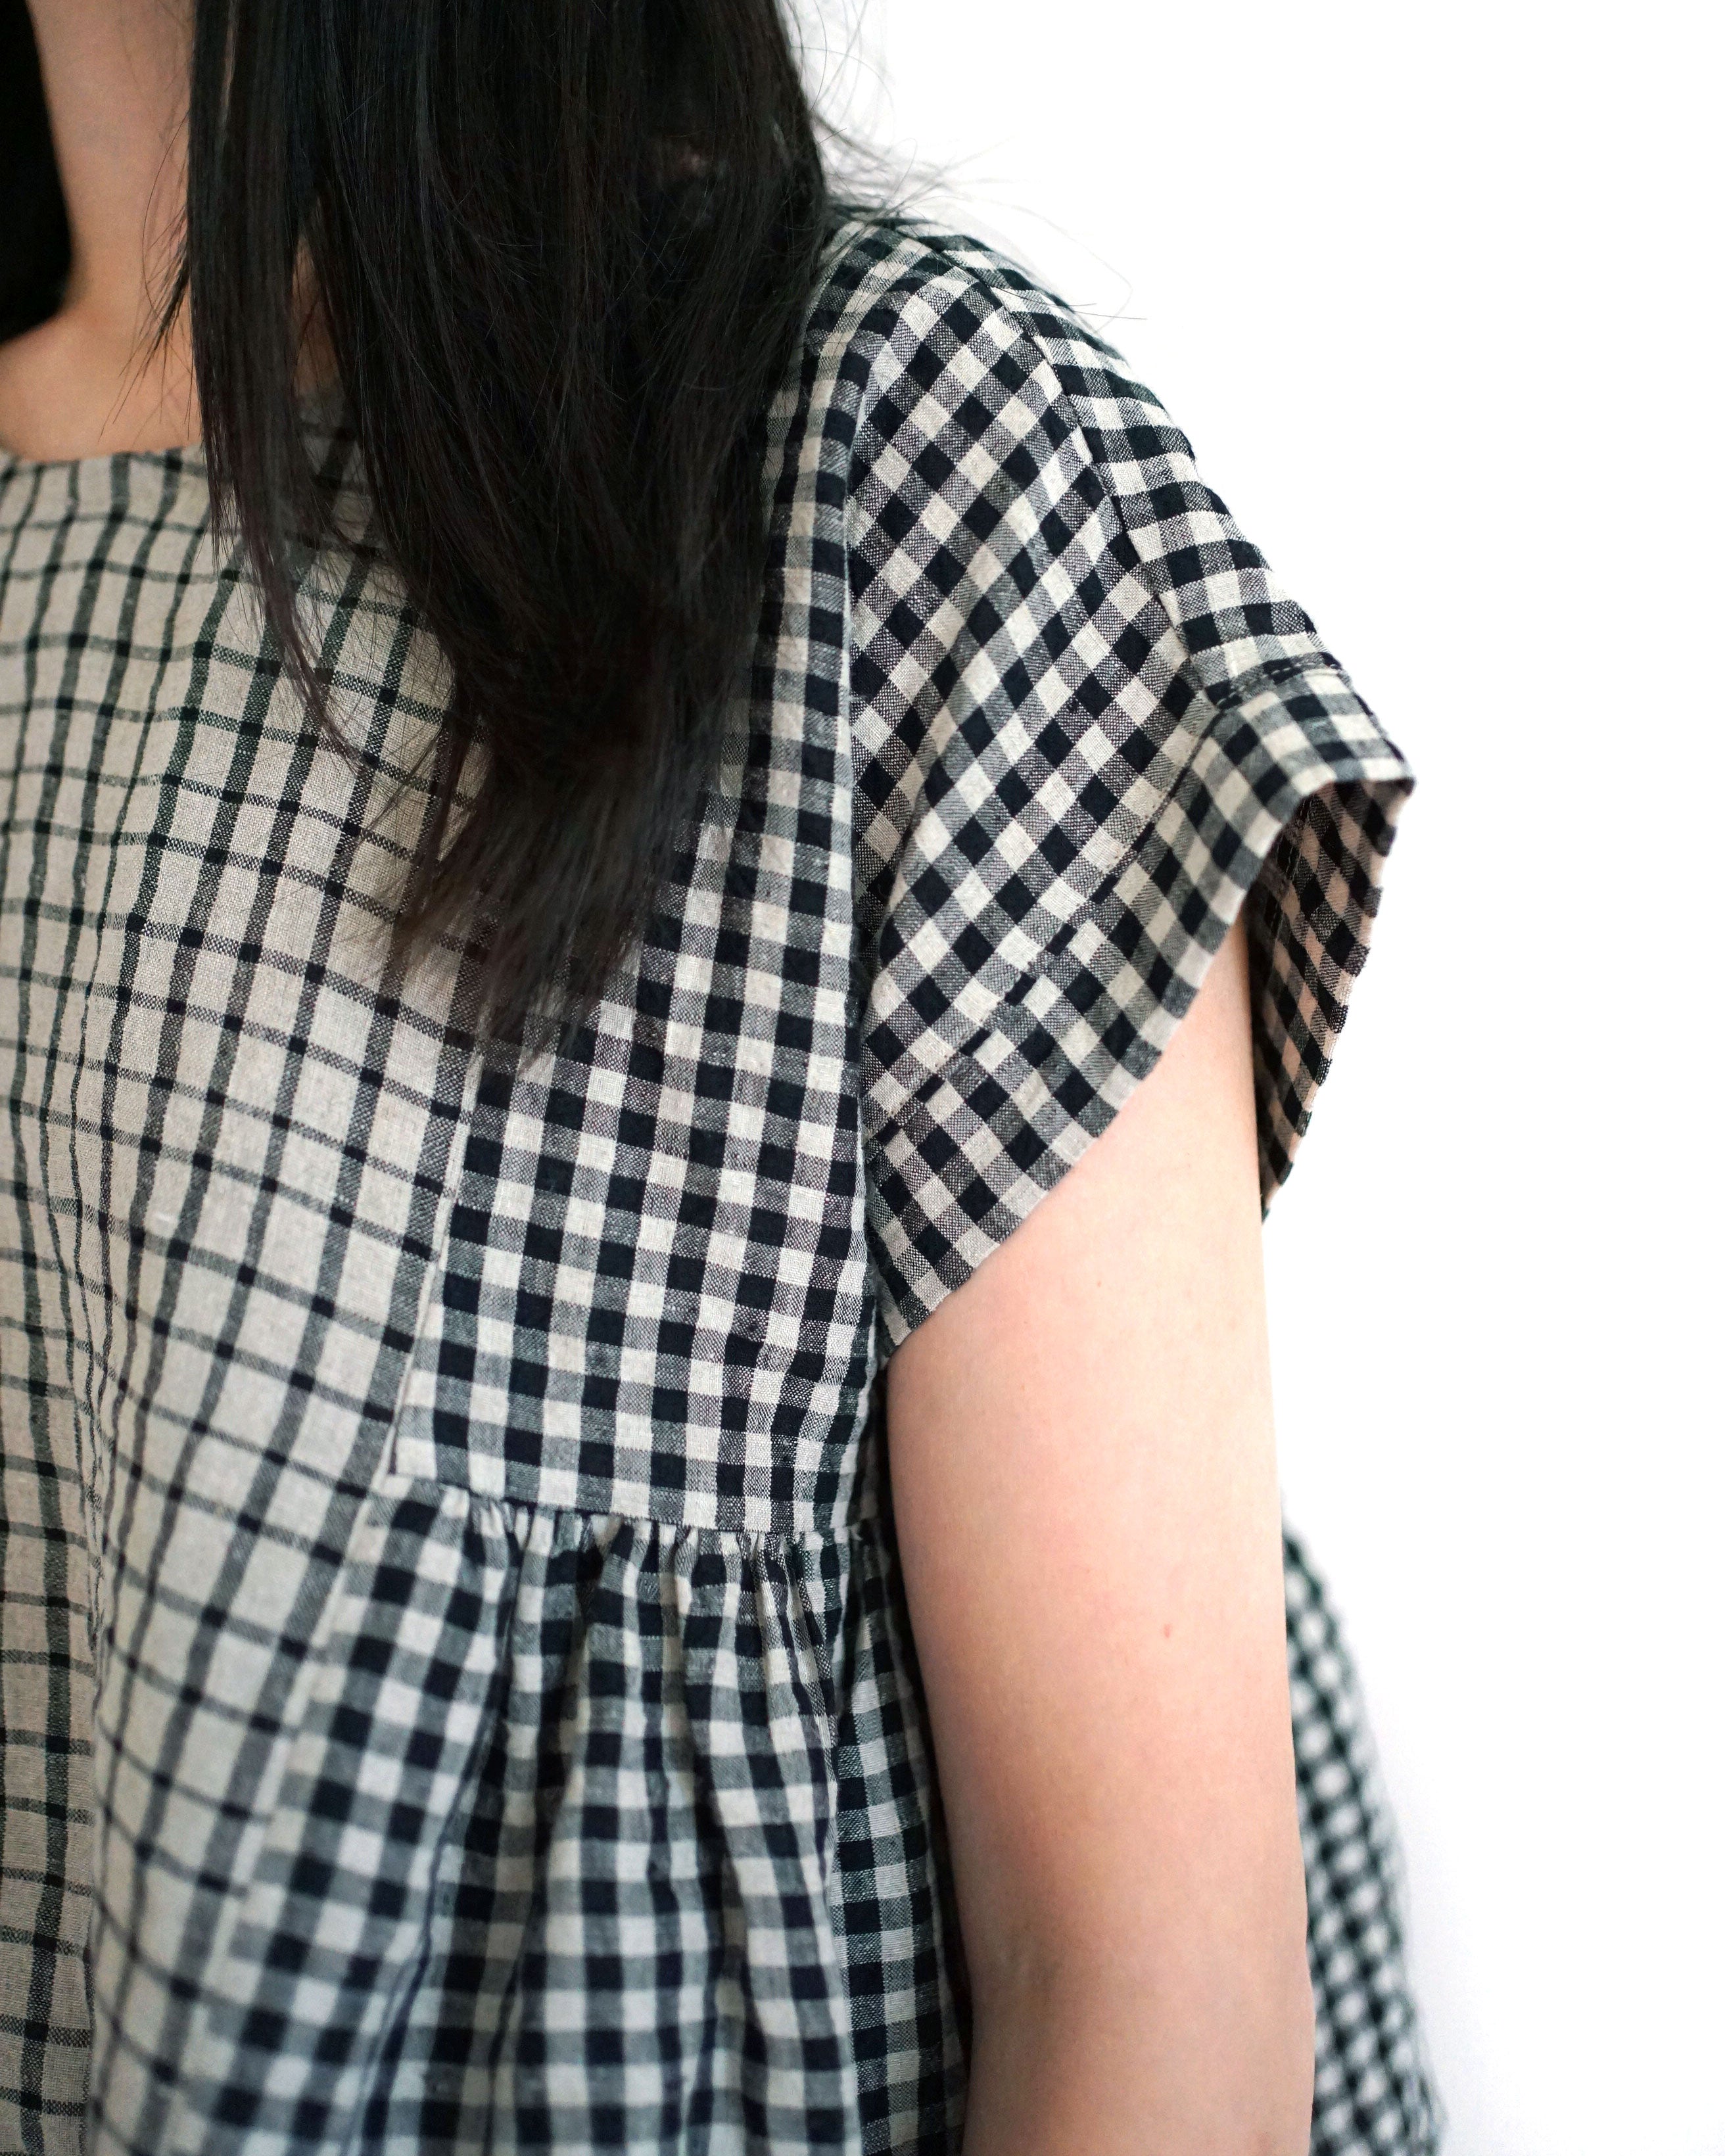 Small Black and Natural Gingham Linen